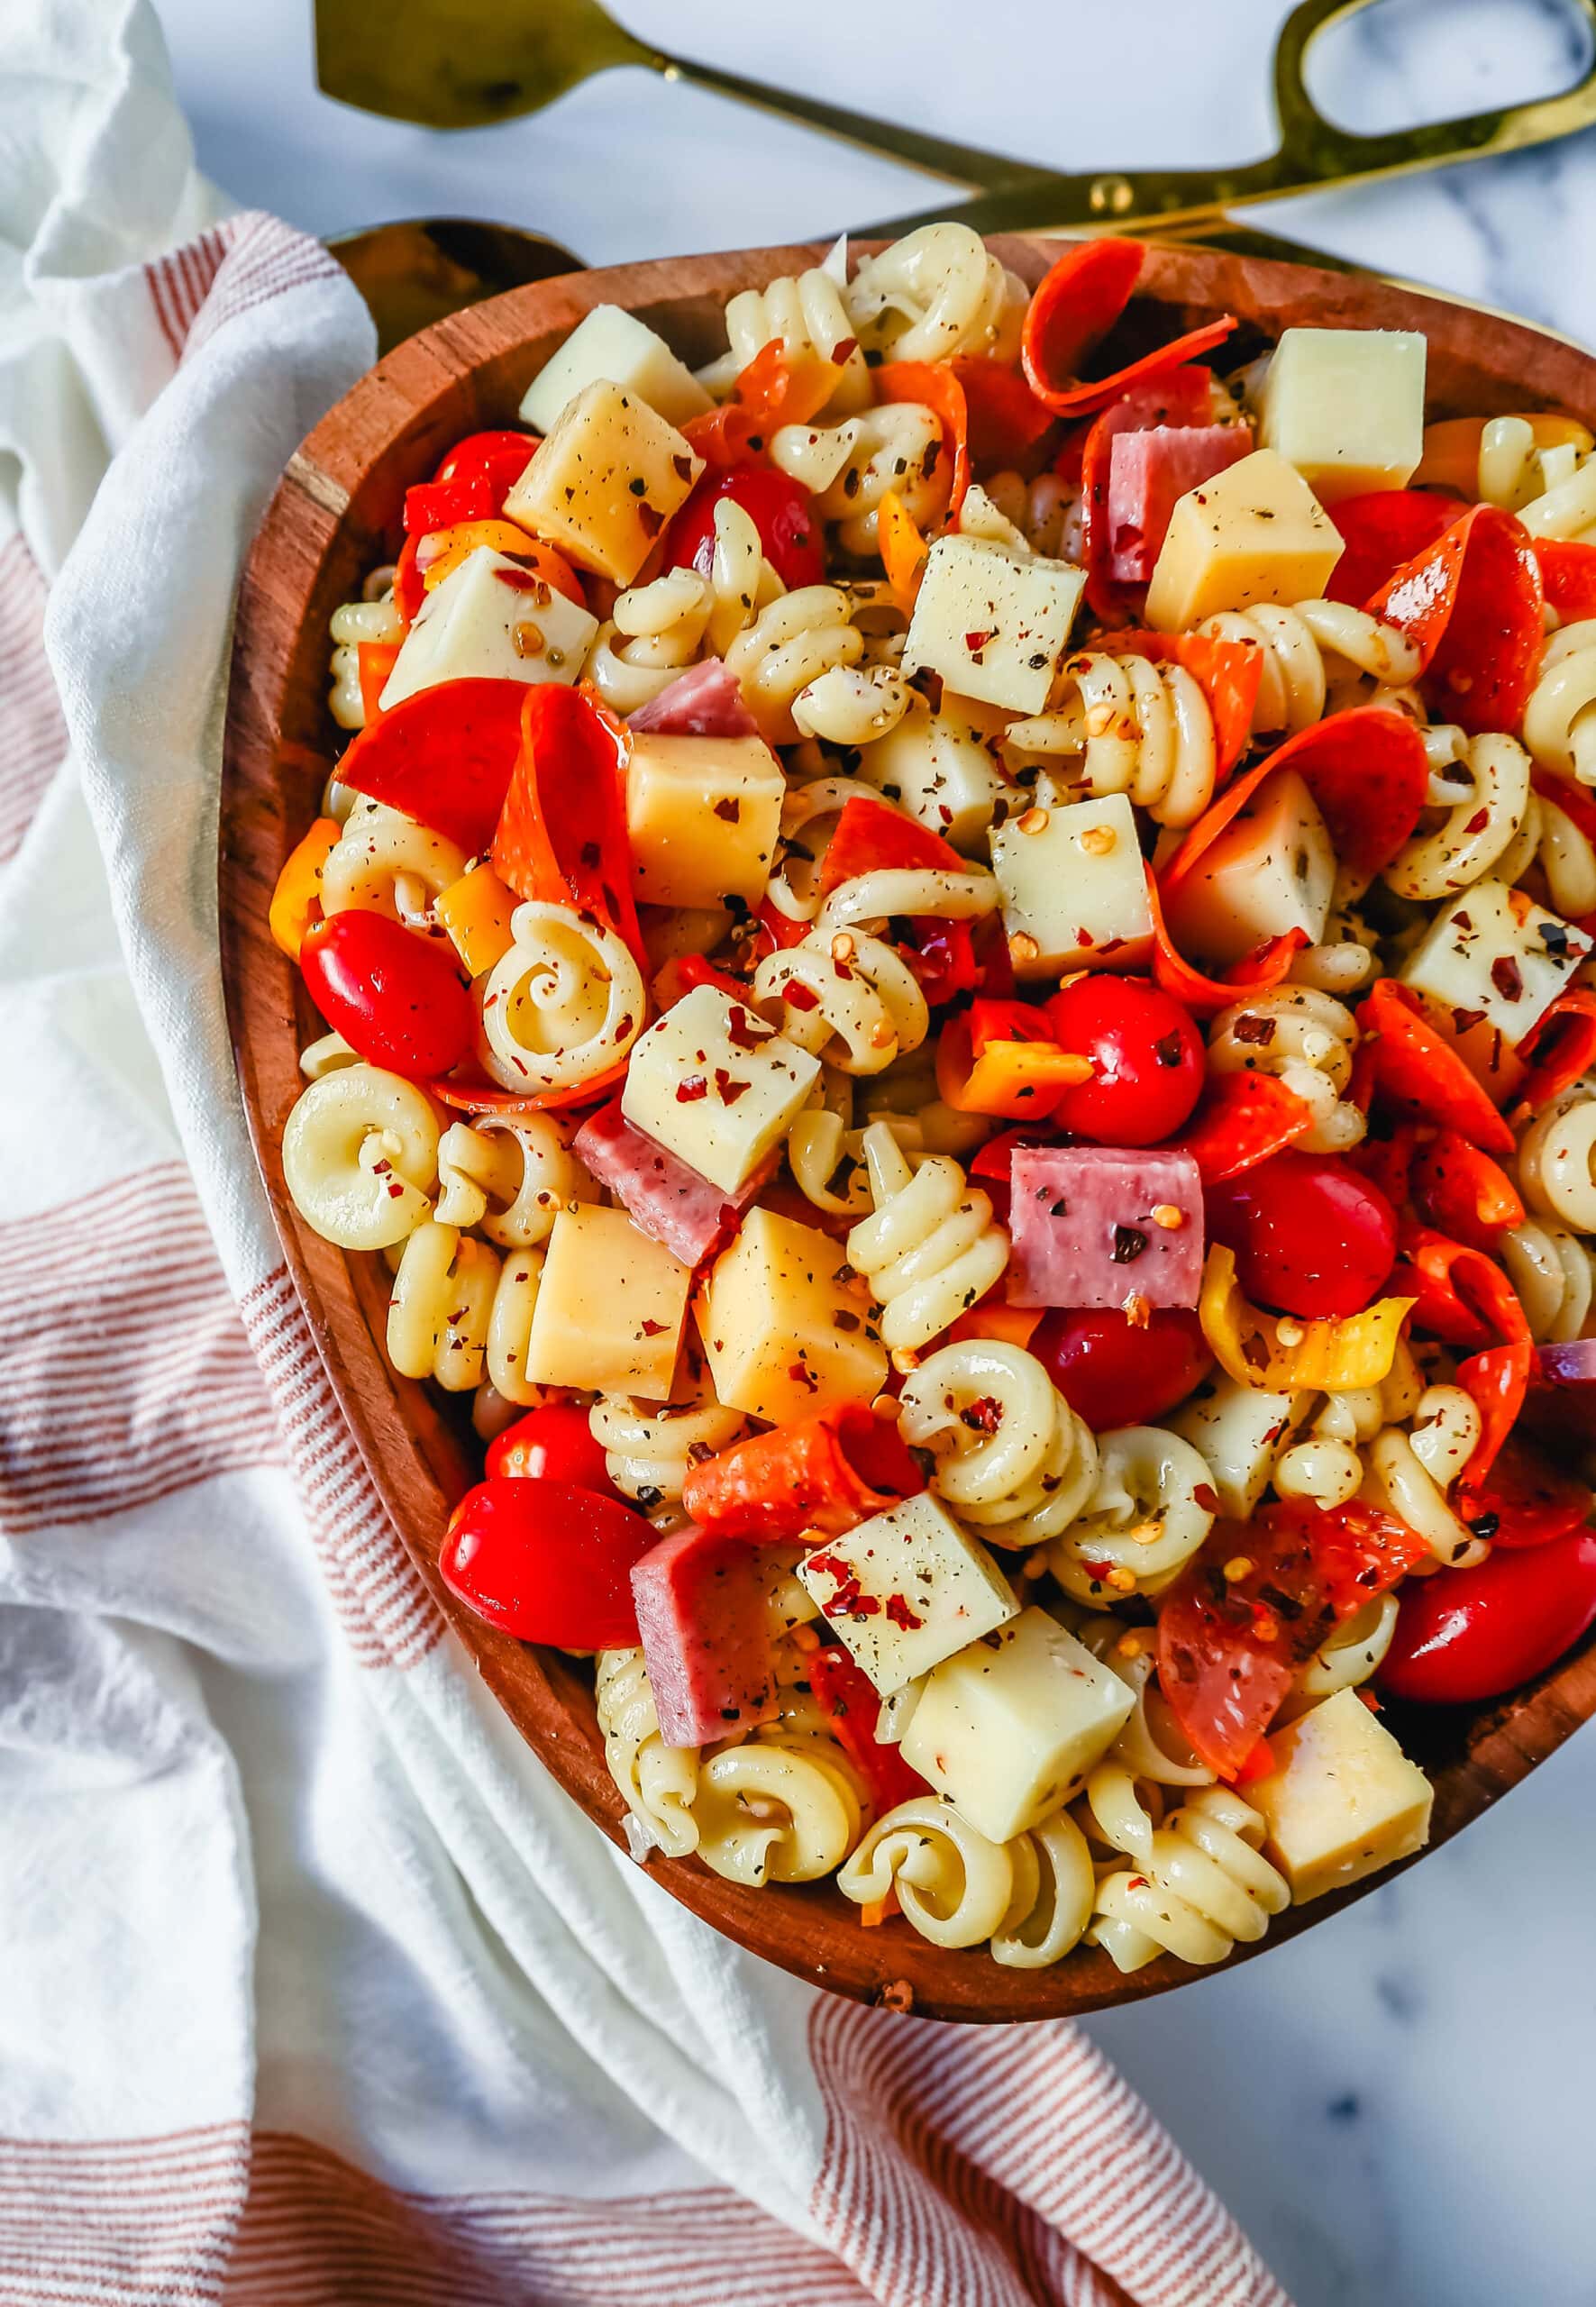 30+ Delicious Picnic Salad Ideas that are sure to satisfy your taste buds and impress your guests. Whether you're looking for a classic salad recipe, easy picnic food ideas, or healthy picnic ideas, we've got you covered. 